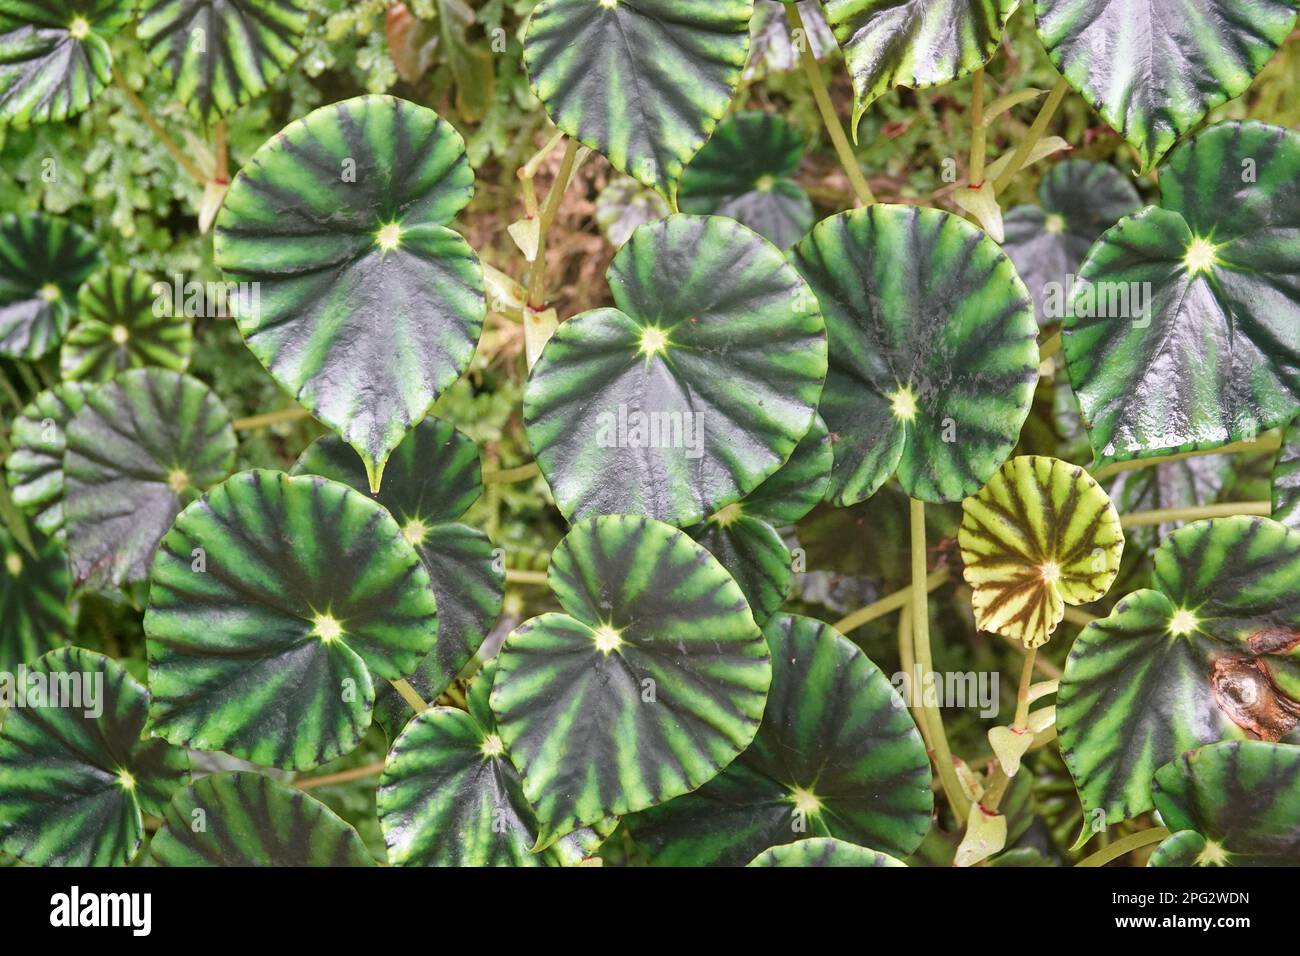 Green leaves of plant Begonia mazae. Begonia mazae is a species of flowering plant in the family Begoniaceae, native to southeastern Mexico. Stock Photo